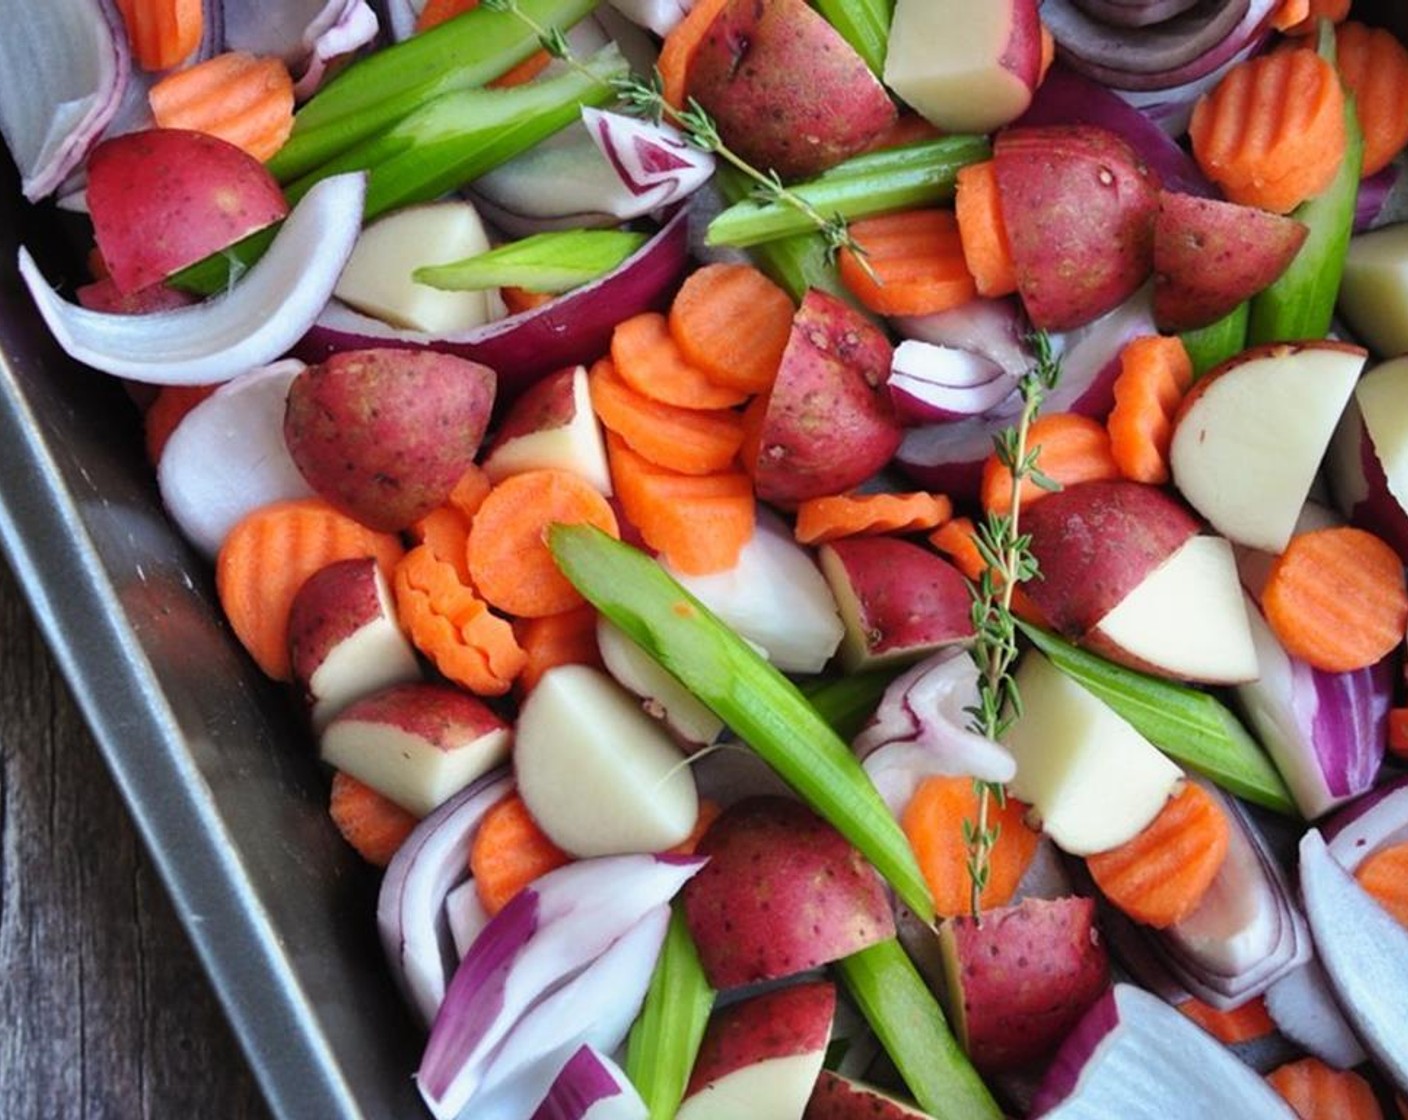 step 6 Spread Celery (3 stalks), Carrot (1 cup), Red Onion (1), Red Potatoes (3 cups) at the bottom of a 9x13-inch pan.